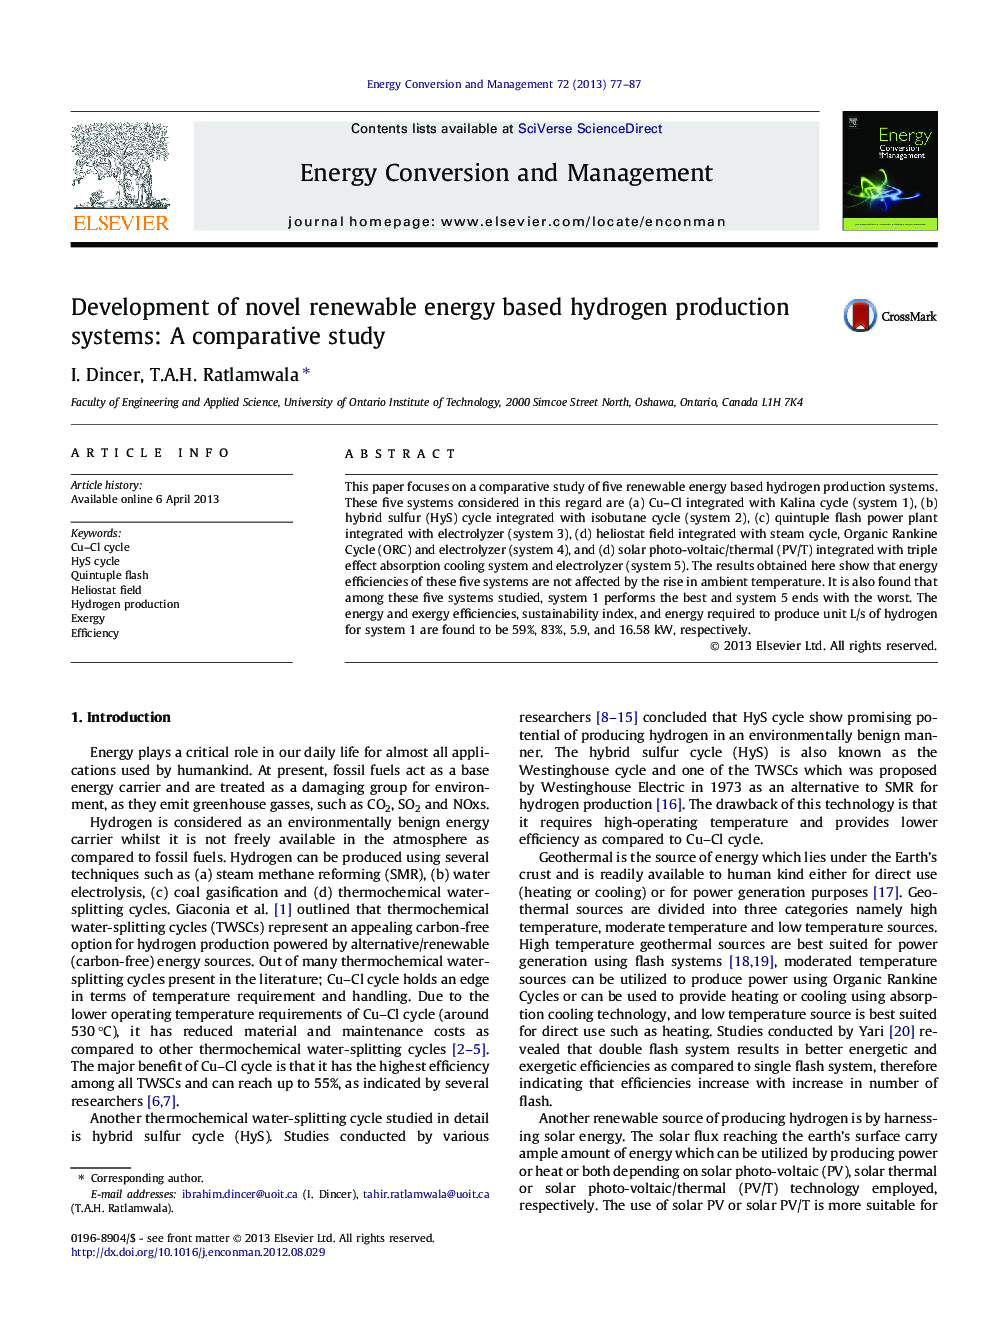 Development of novel renewable energy based hydrogen production systems: A comparative study